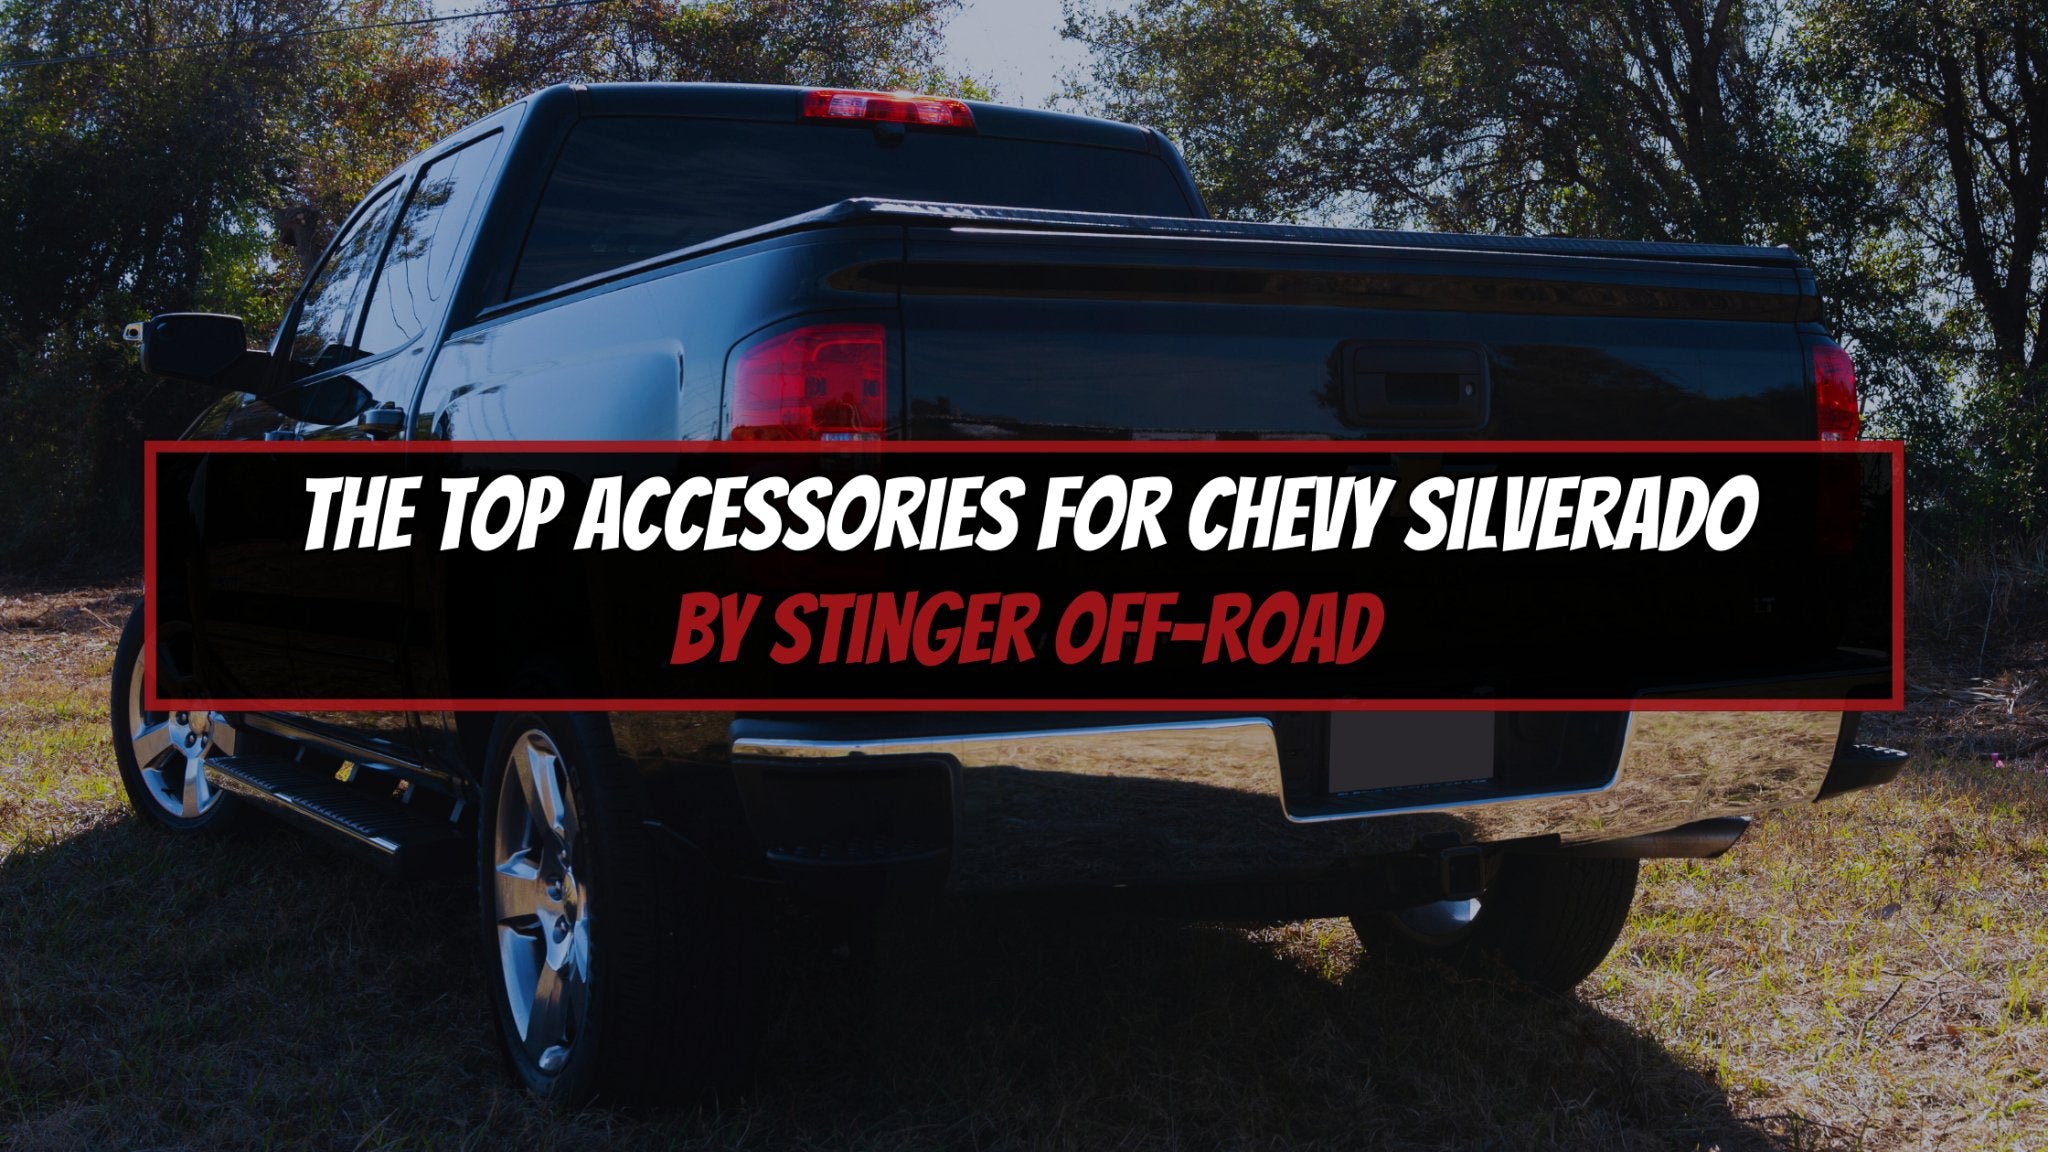 The Top Accessories for Chevy Silverado by Stinger - Stinger